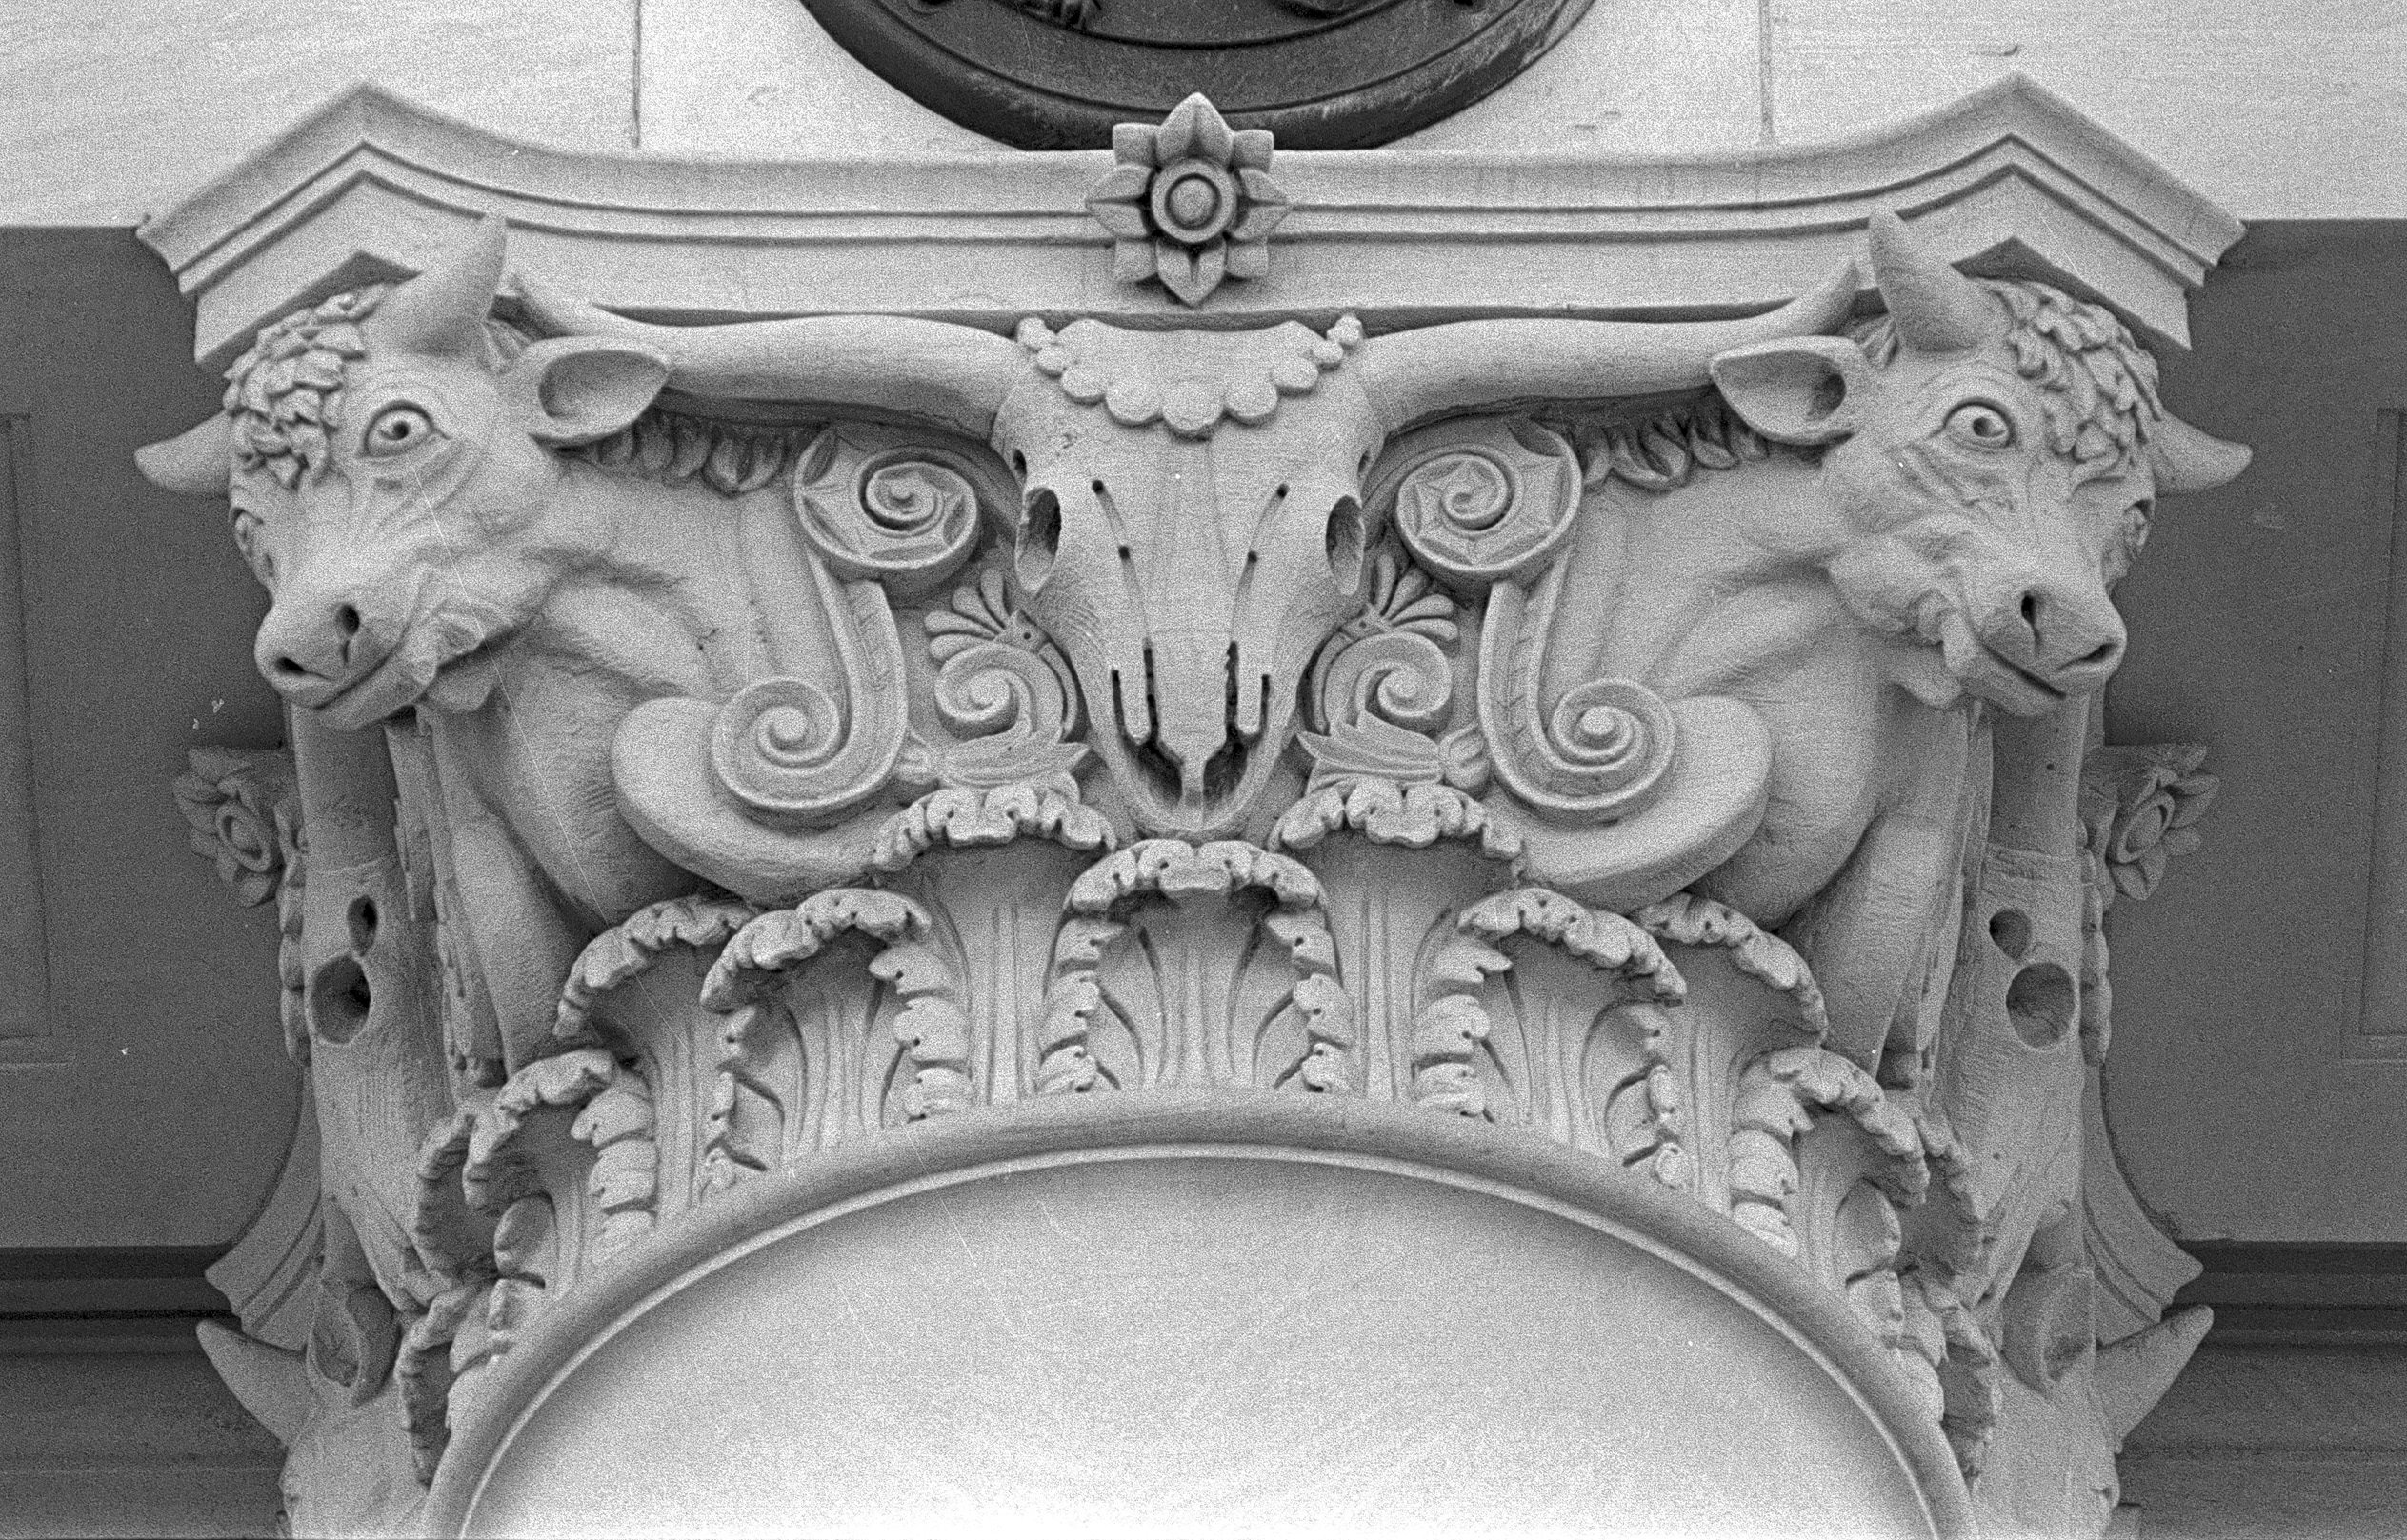 Top of the ornate columns of the US Post Office in Fort Worth, Texas, with Corinthian detailing and cattle motifs.